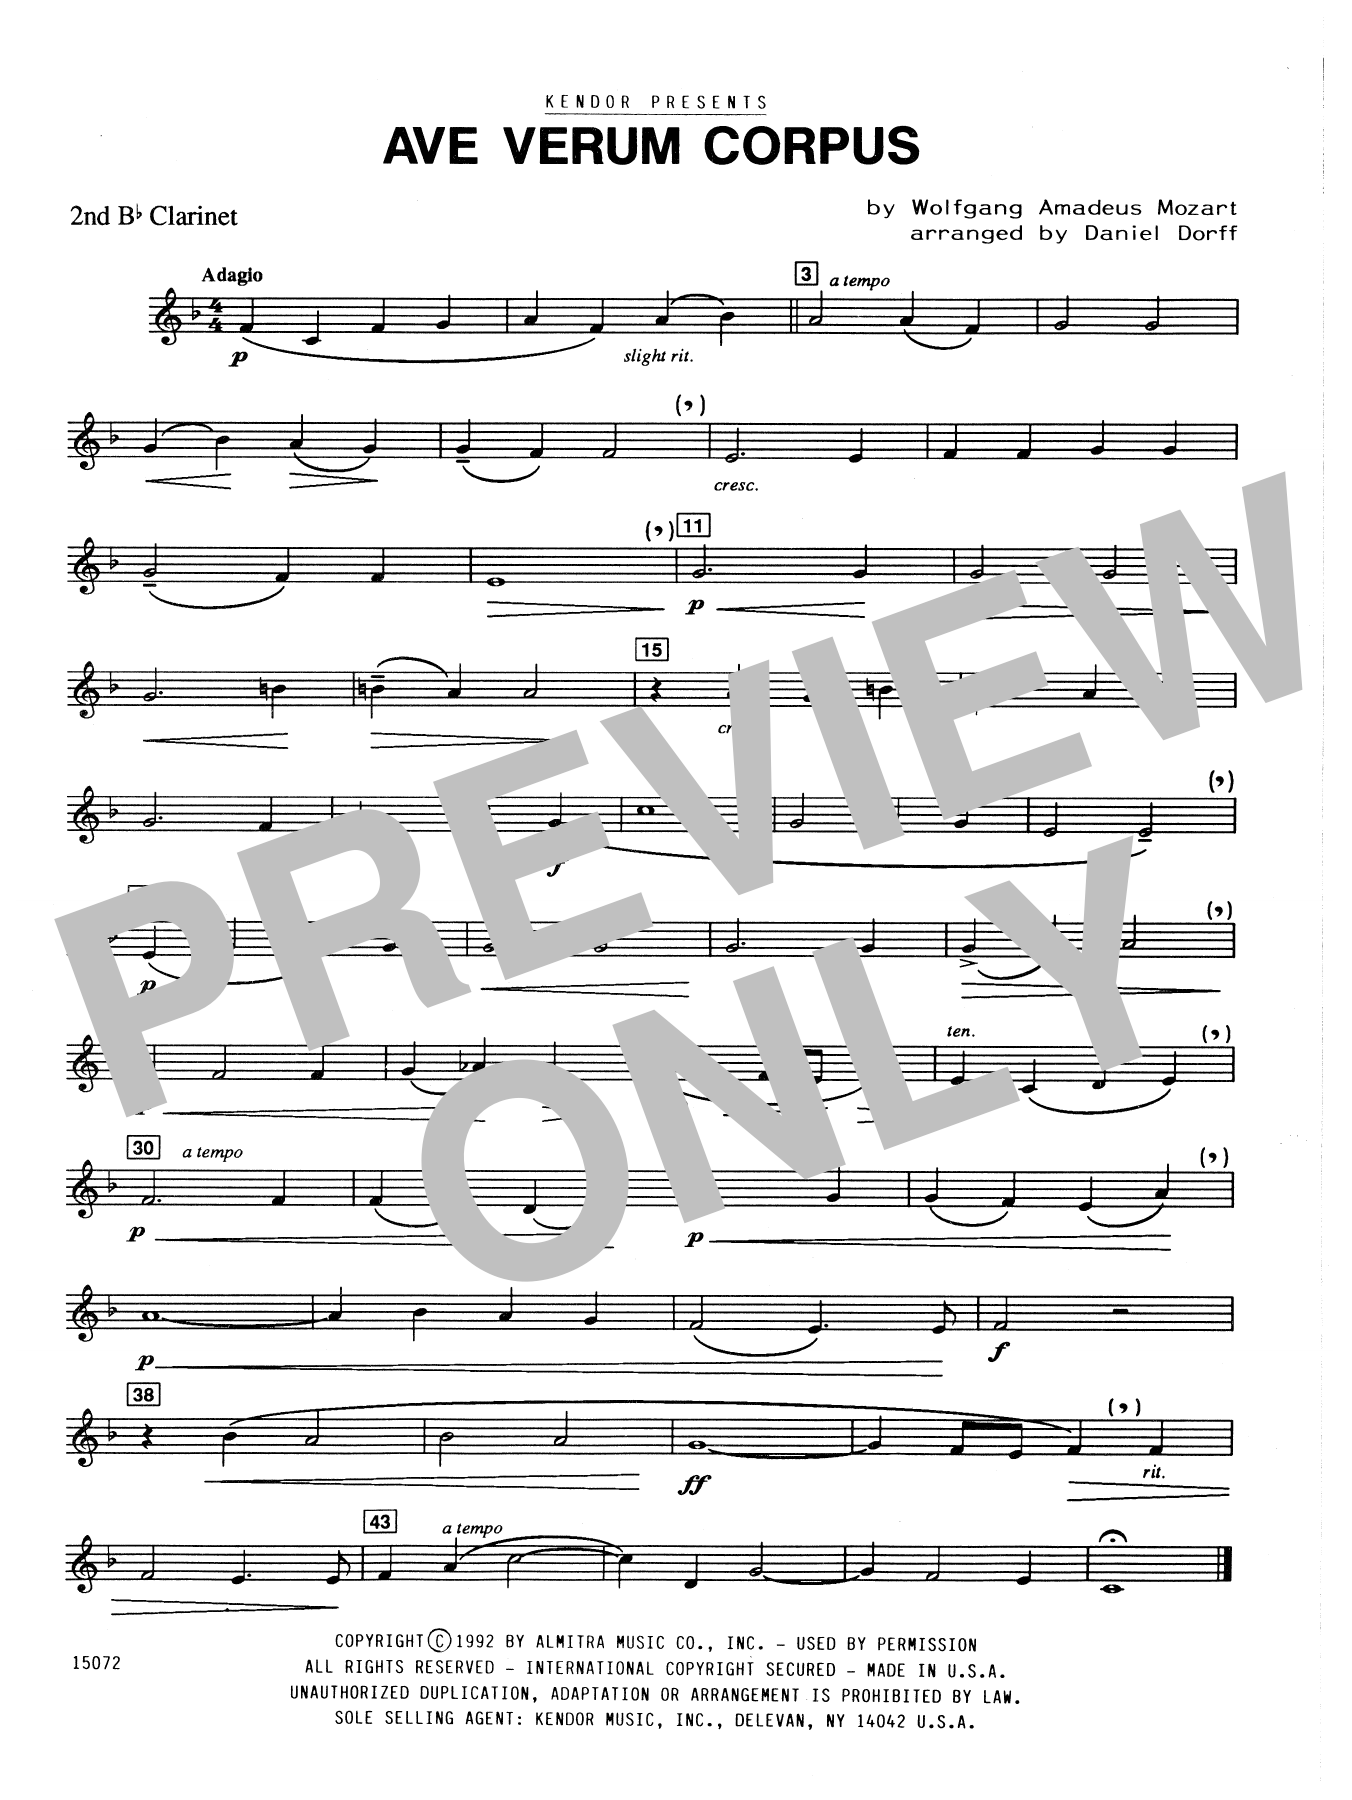 Daniel Dorff Ave Verum Corpus - 2nd Bb Clarinet sheet music notes and chords. Download Printable PDF.